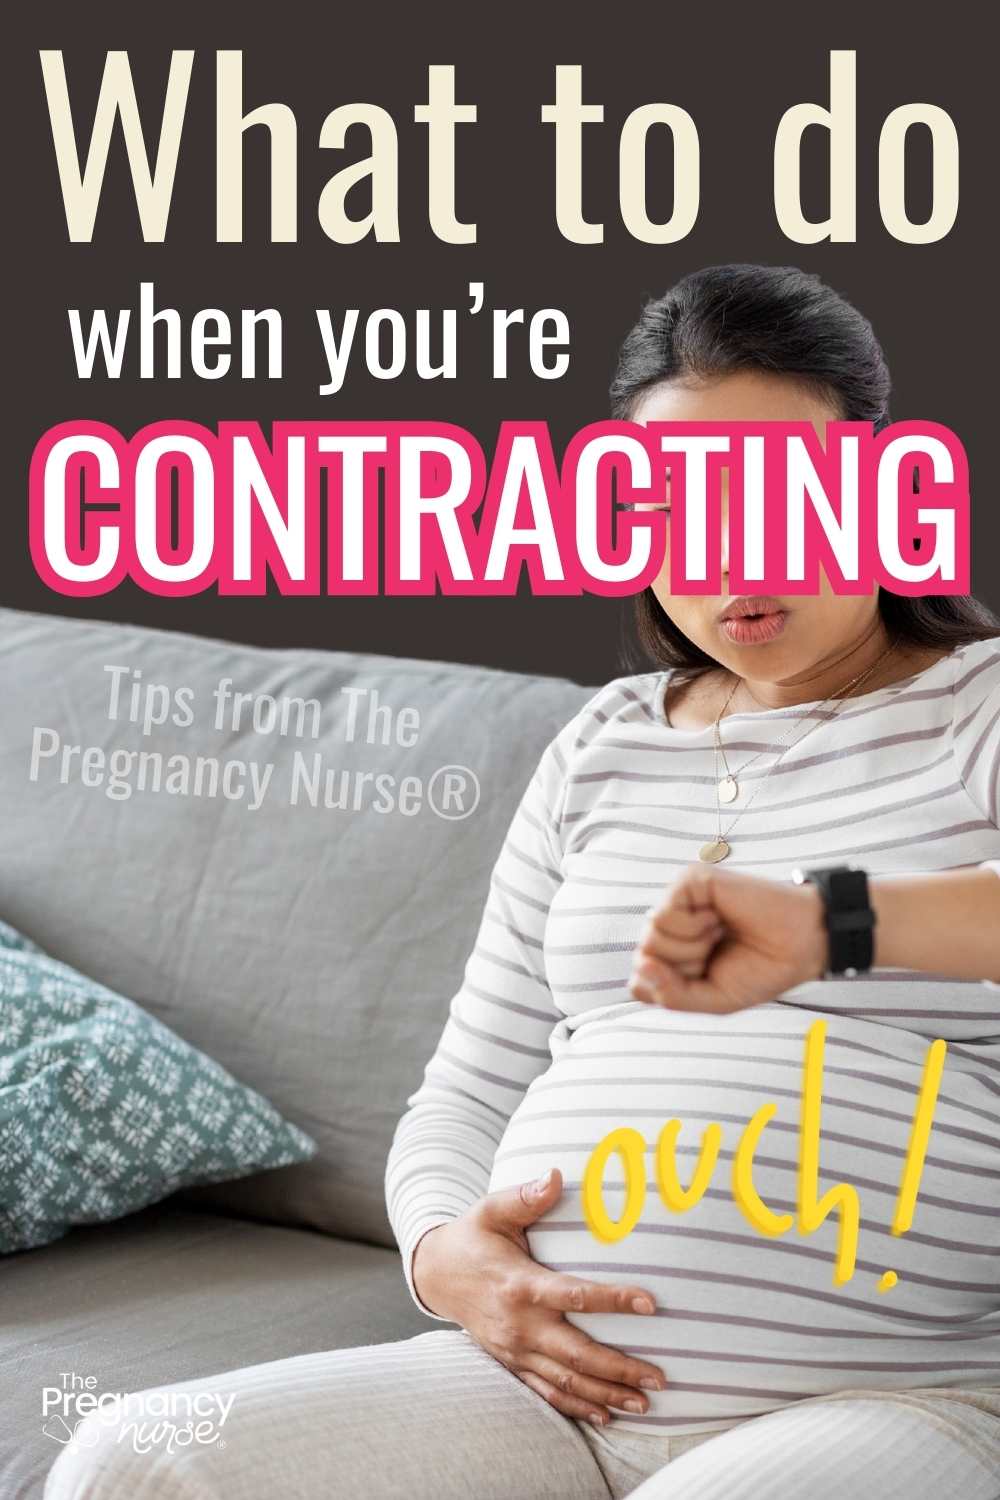 Is it time? Or, not yet? Contractions can be puzzling. Unravel the mystery with us as we share some vital tips on what to do when contractions hit. Stay calm, monitor, and act smart. Click through for more!